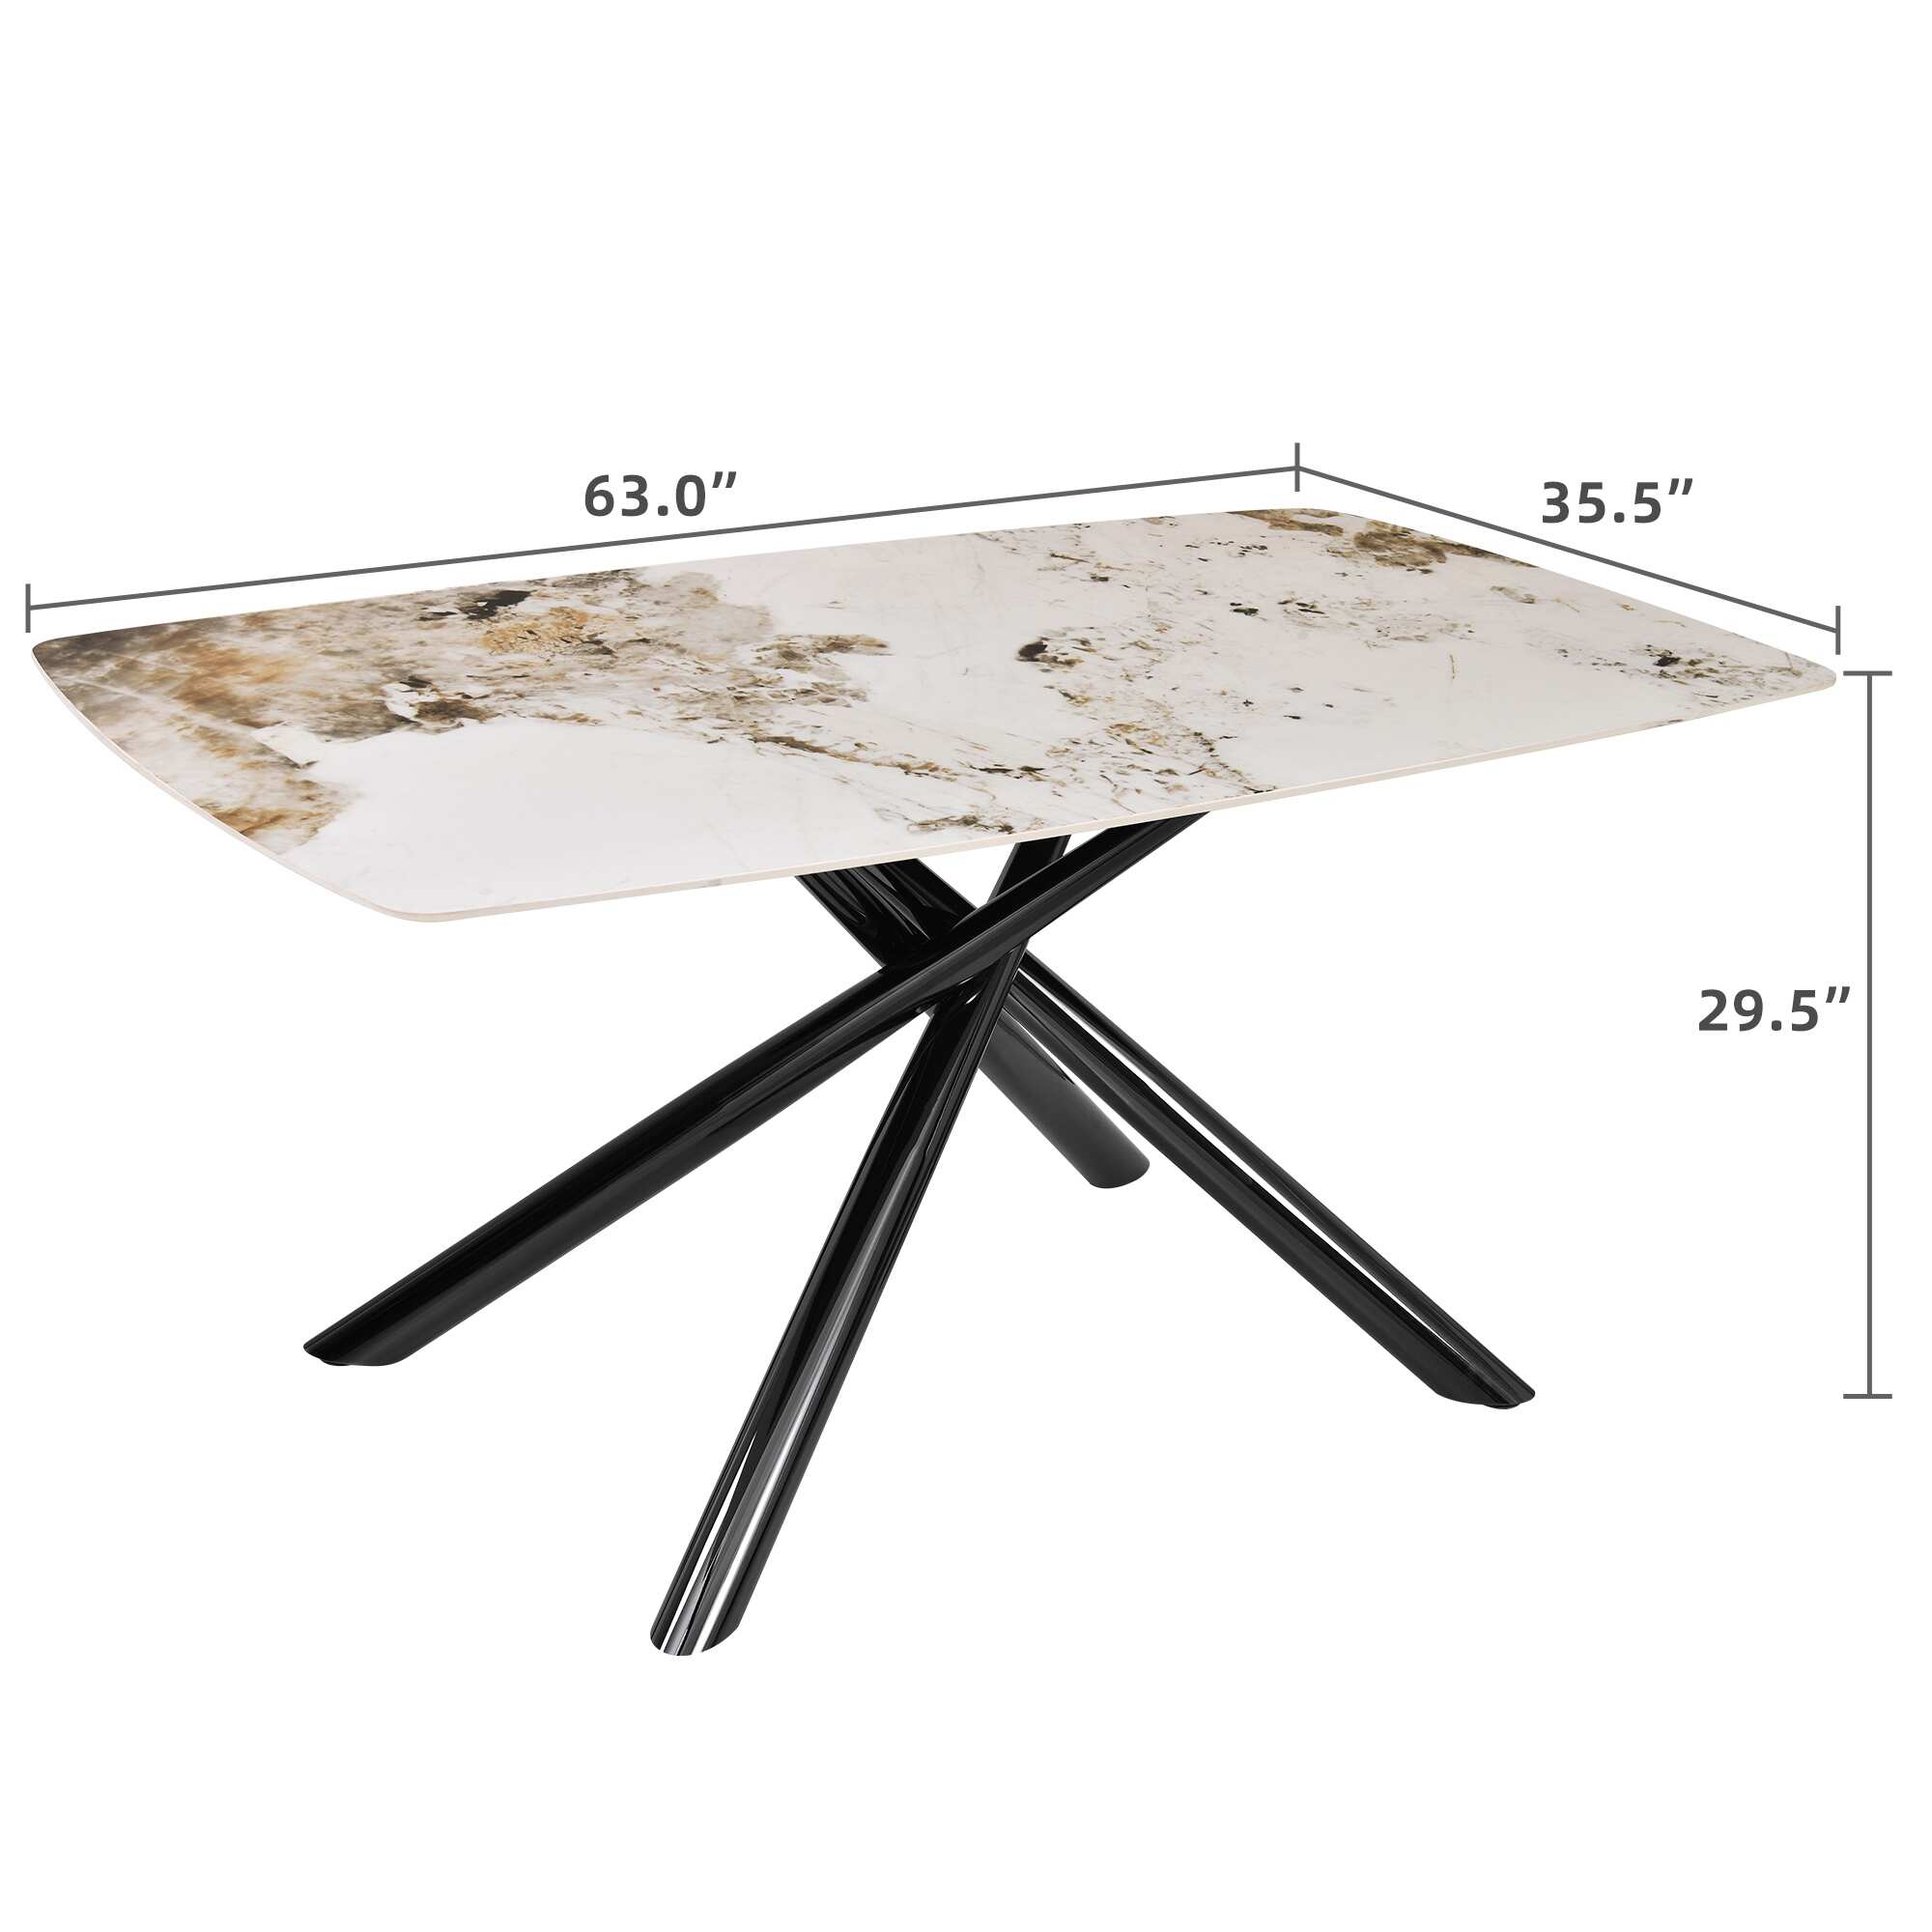 Chrysti Dining Table 63" Marble Top X-shaped Black Carbon Steel Base - 63 in